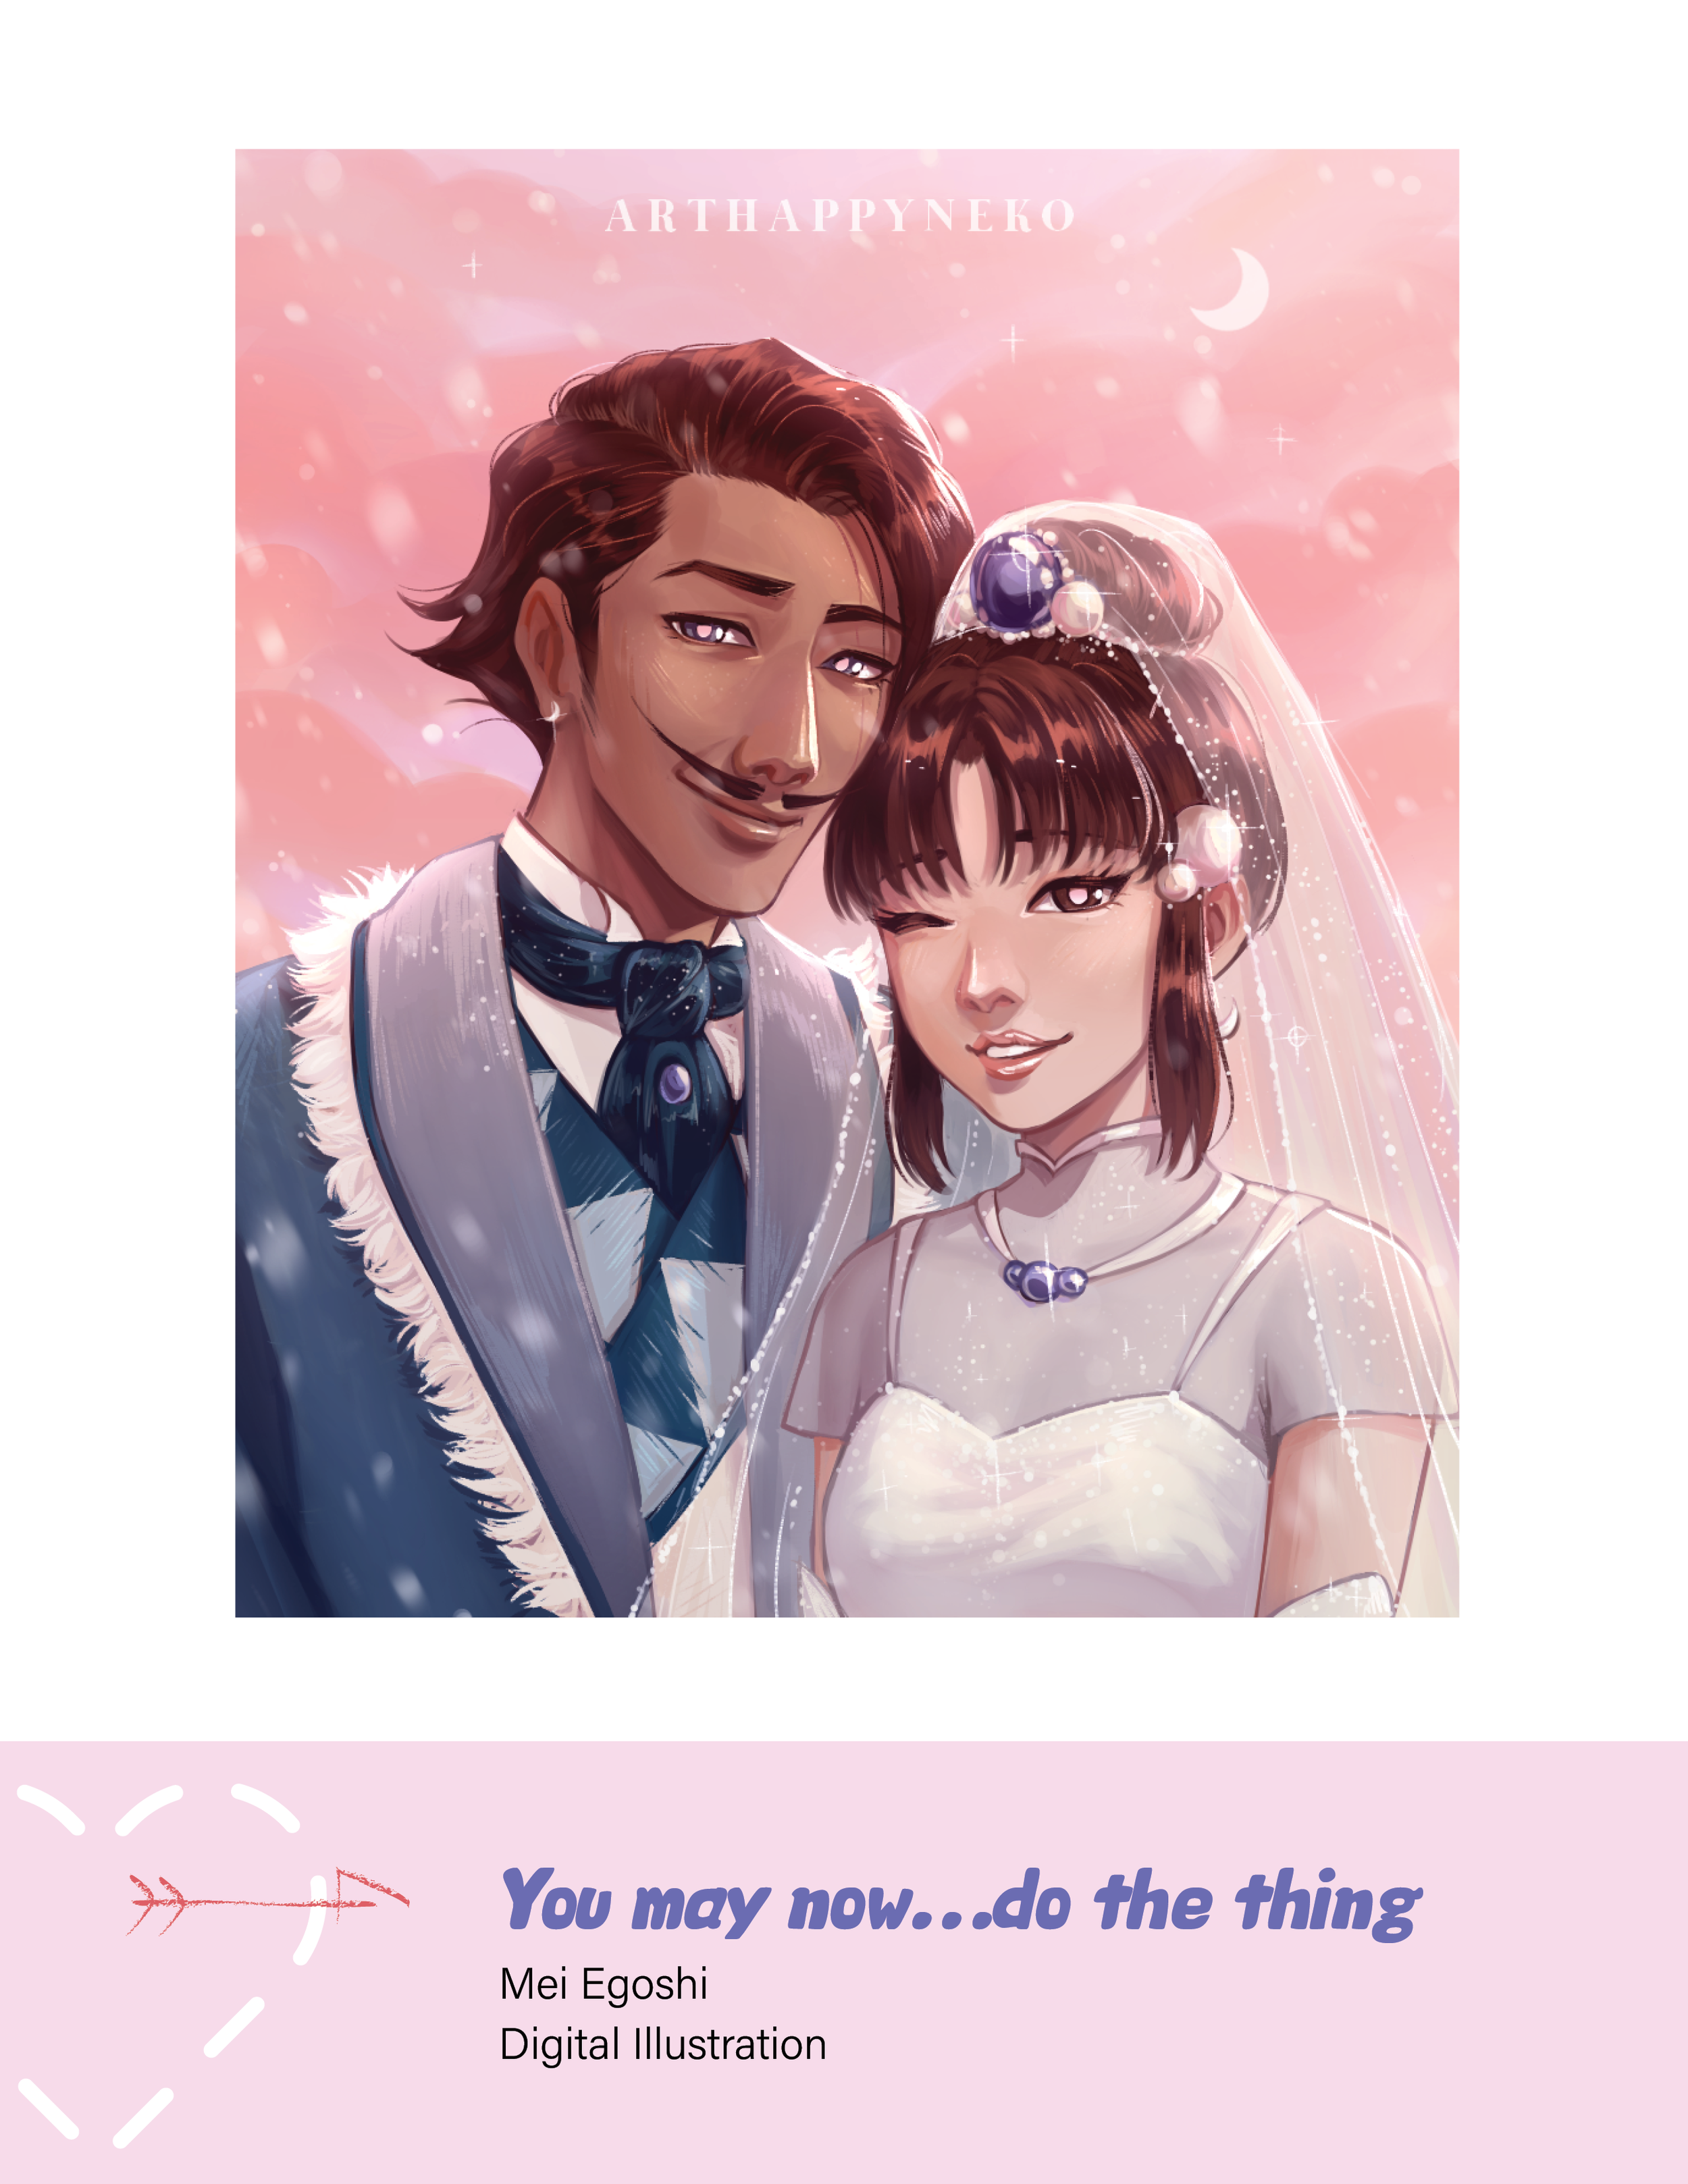 "You may now...do the thing" by Mei Egoshi